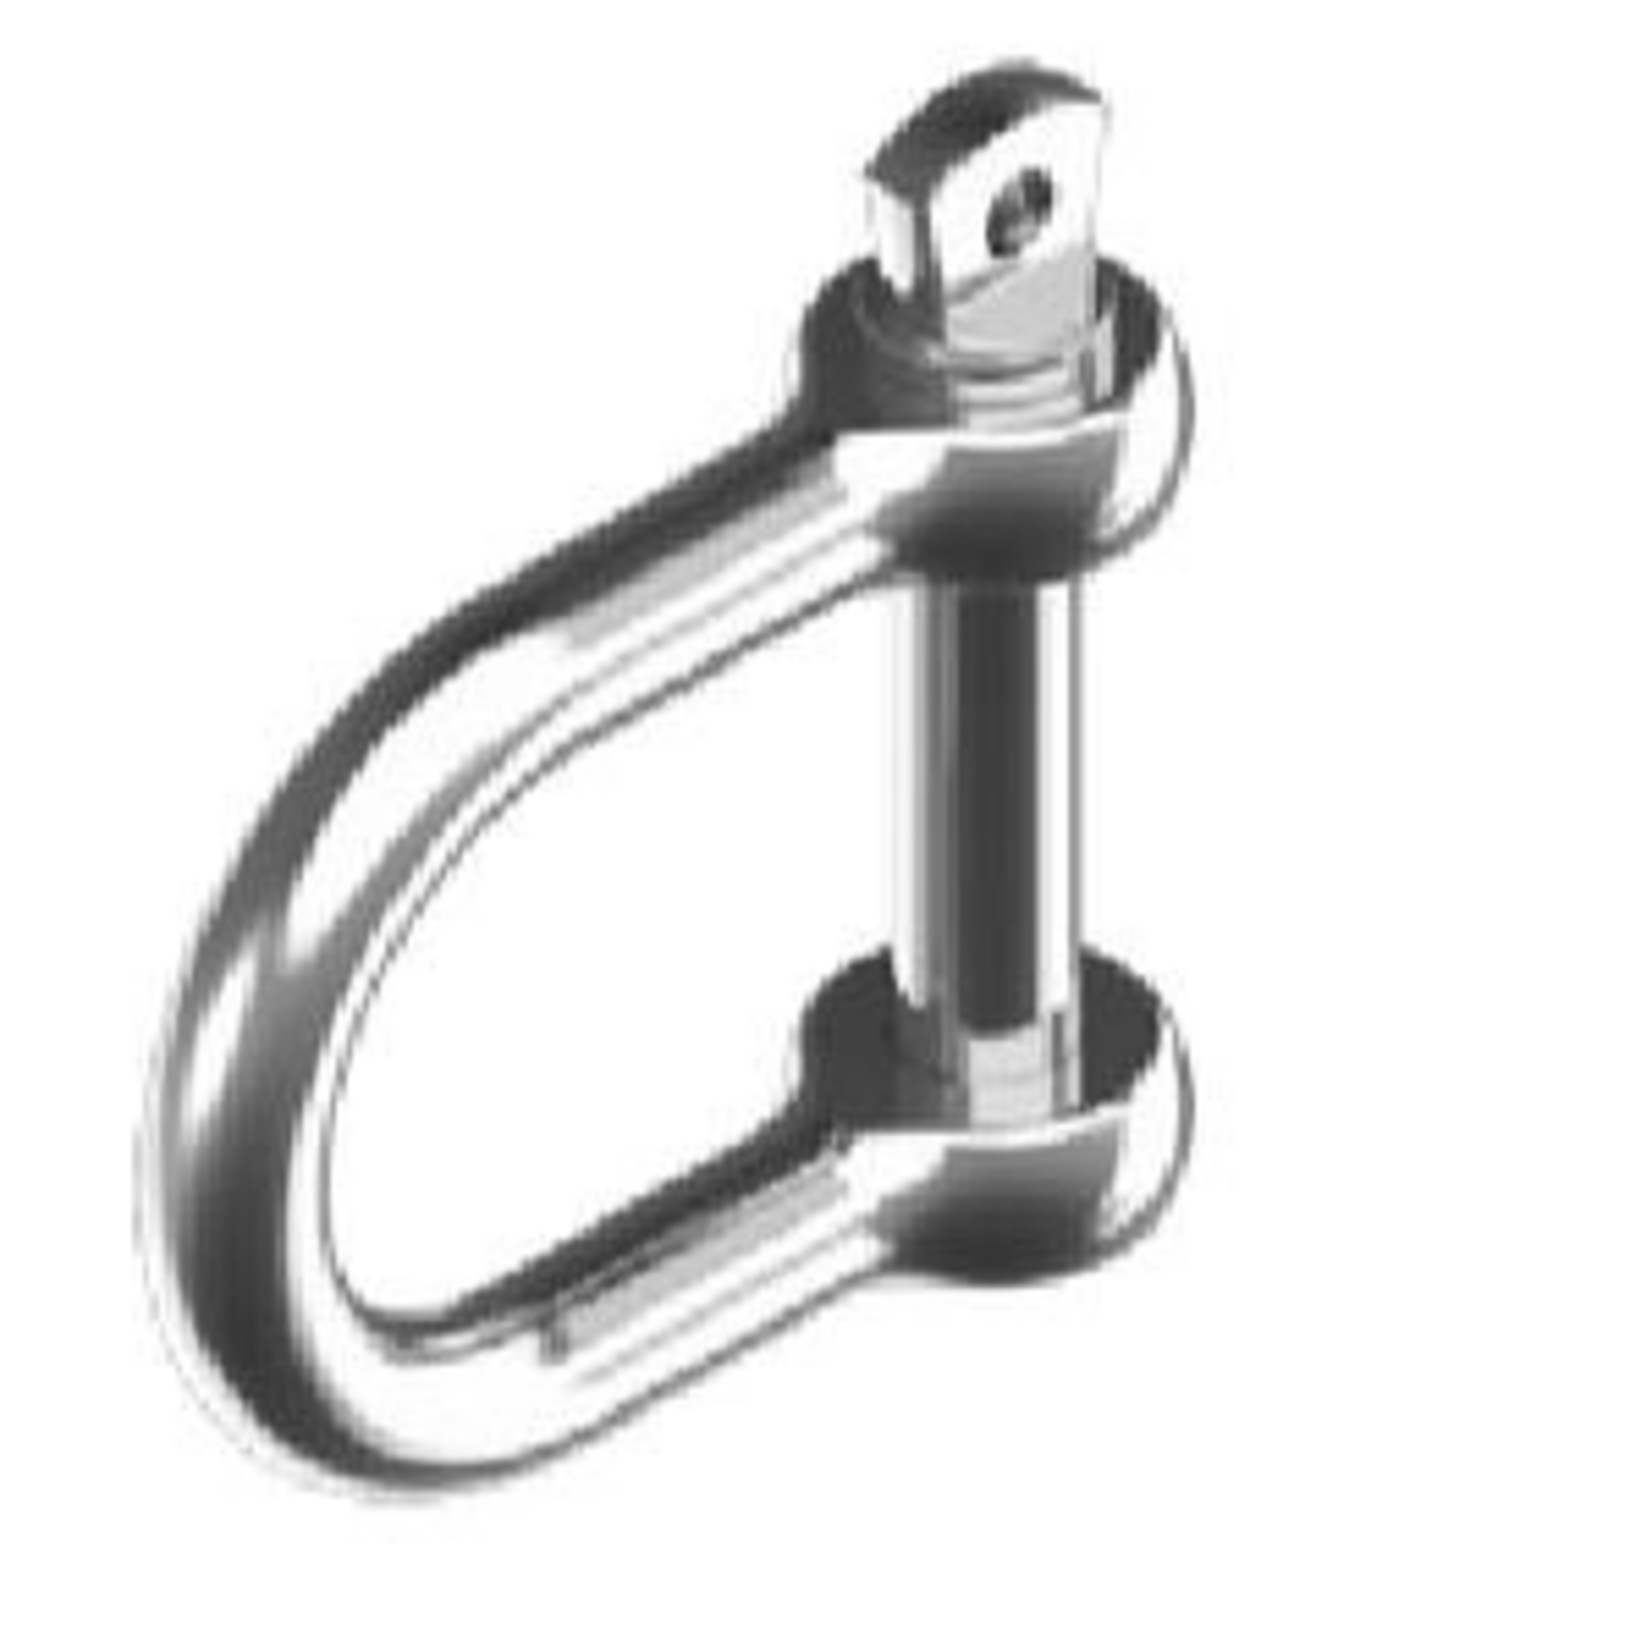 U-Hardware D-shackle wide jaw stainless 10mm